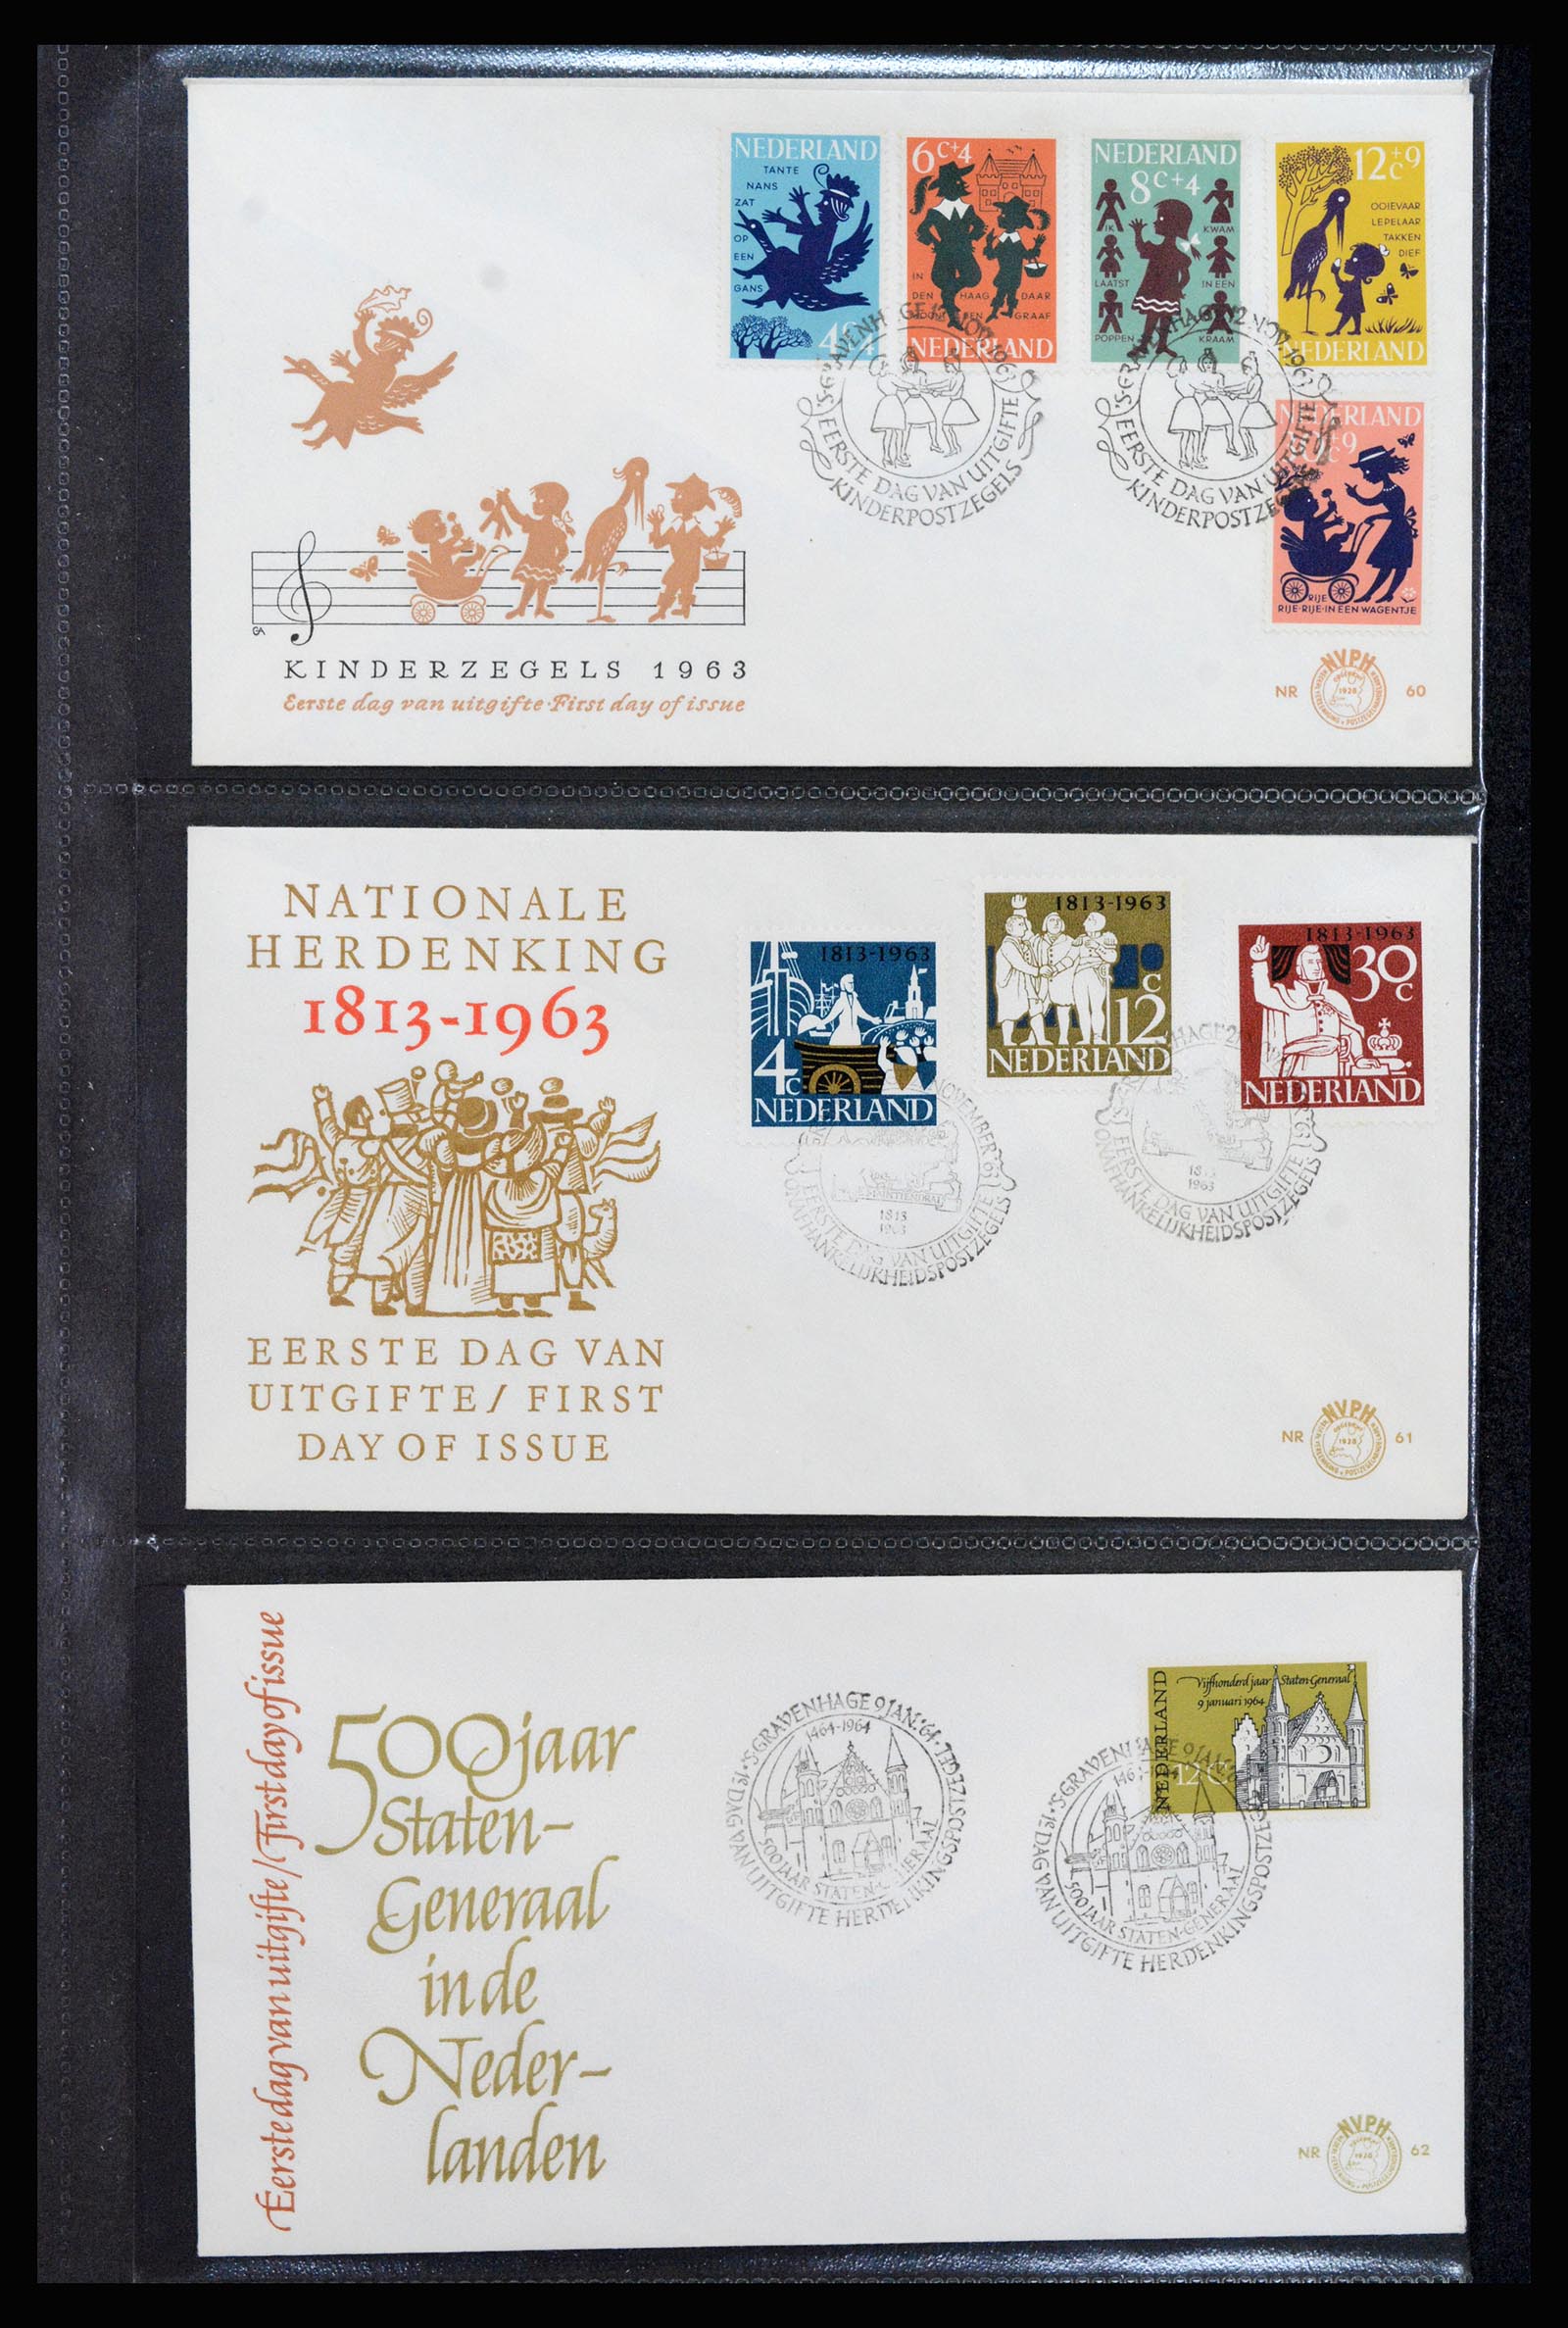 37264 021 - Stamp collection 37264 Netherlands FDC's 1950-1975.